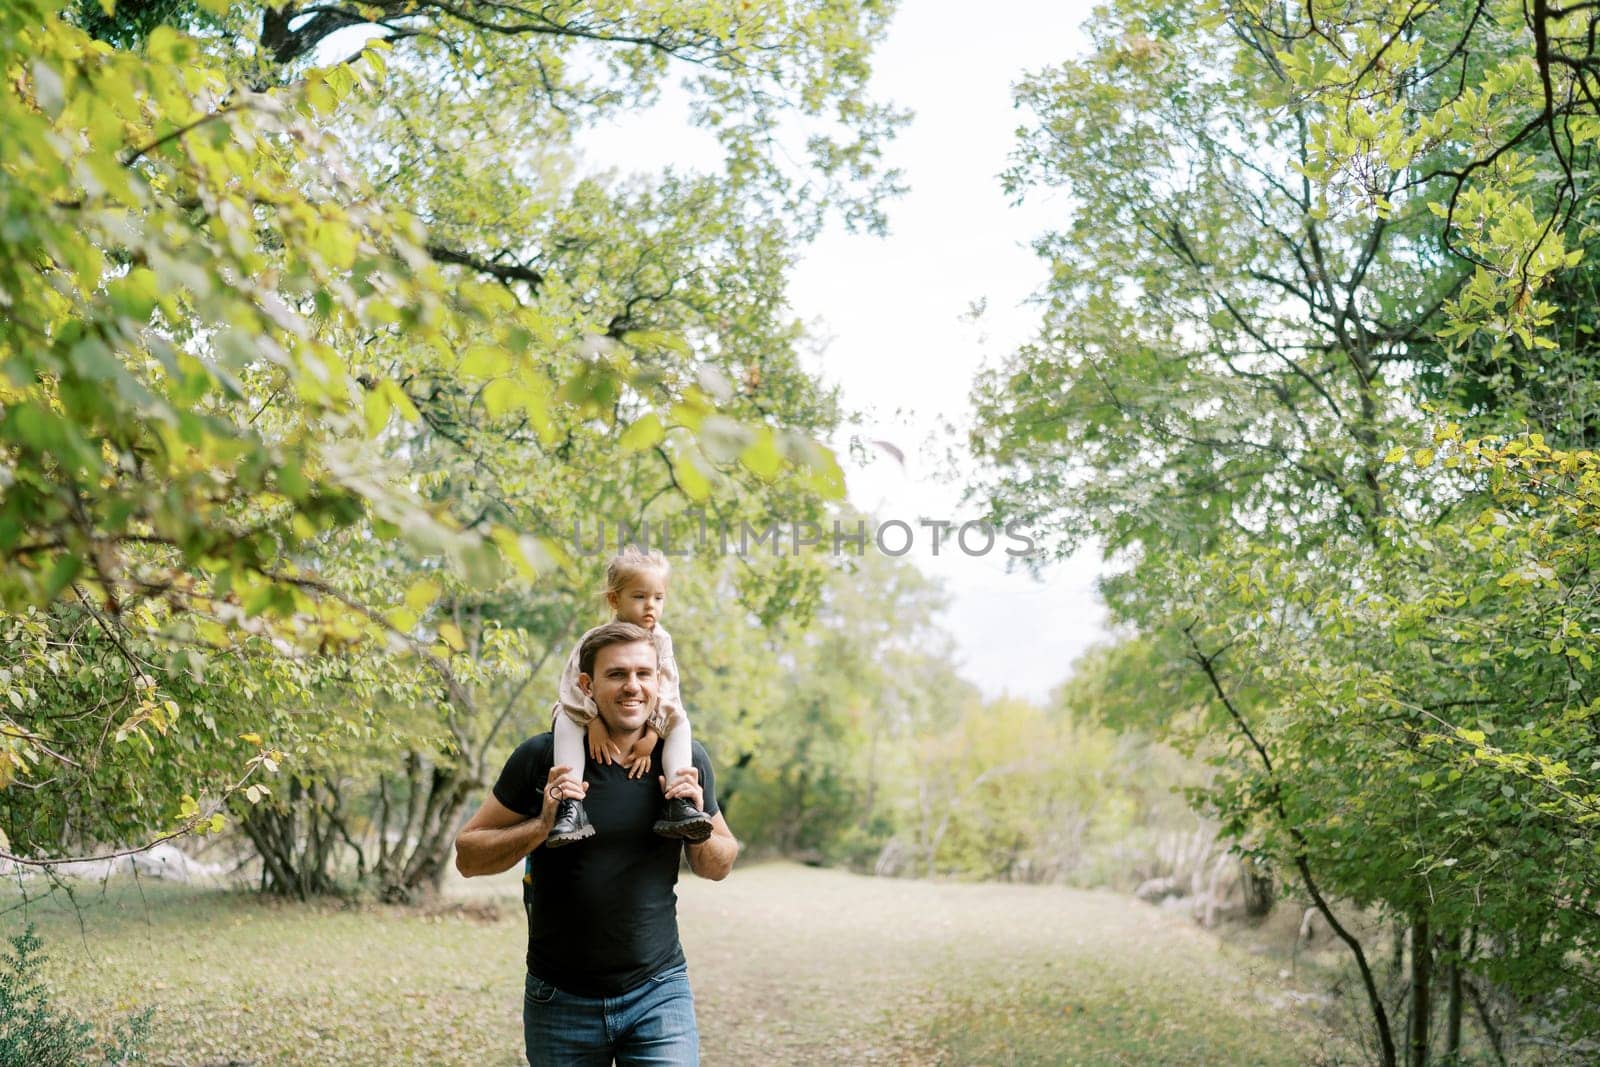 Smiling dad with a little girl on his shoulders walks through a green forest by Nadtochiy